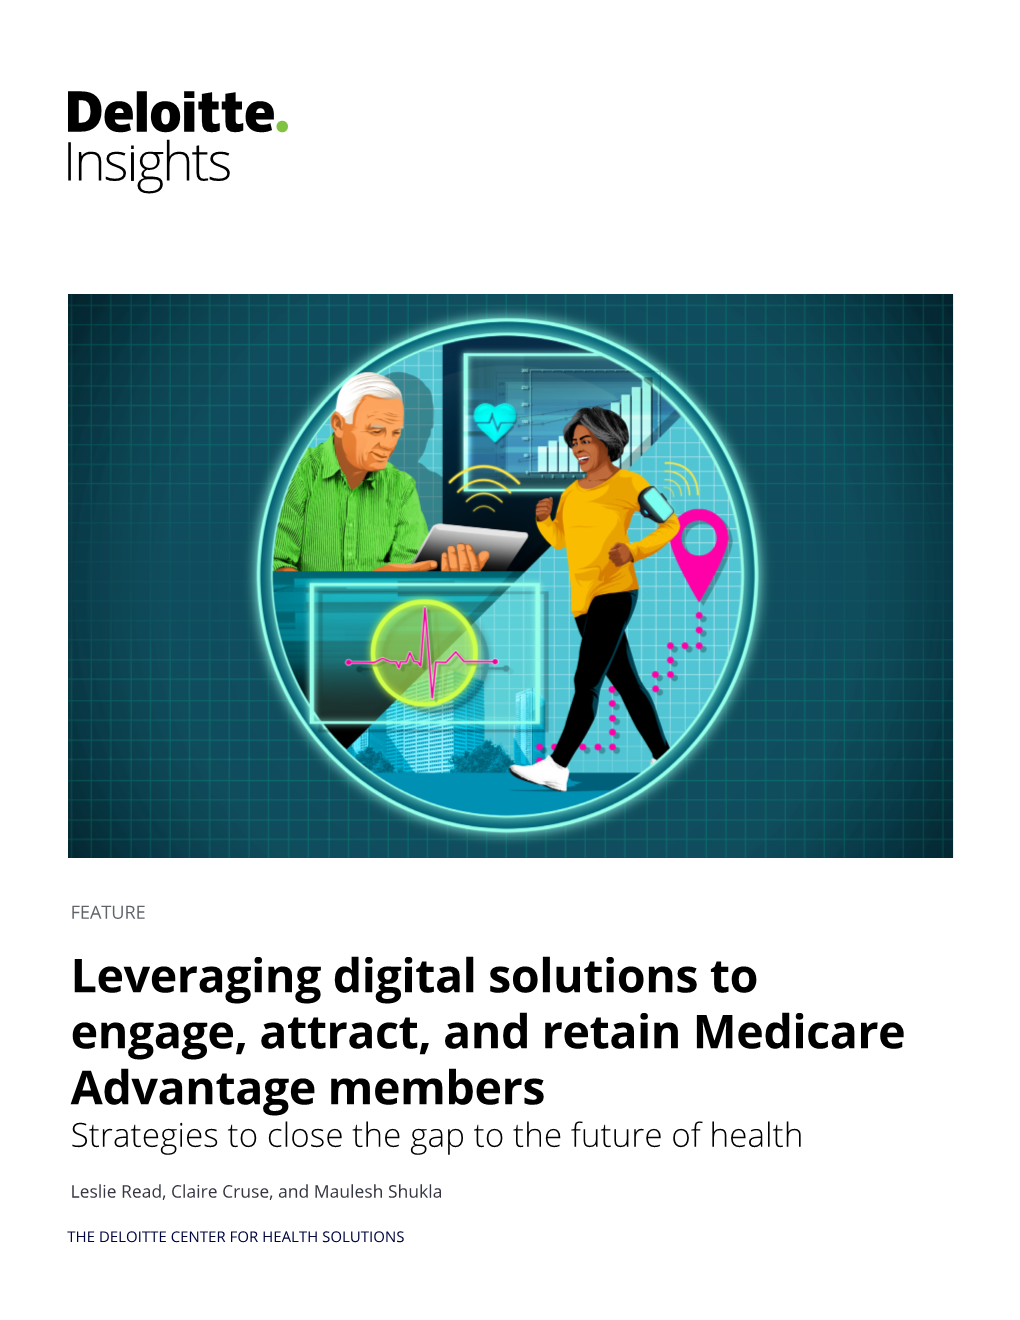 Leveraging Digital Solutions to Engage, Attract, and Retain Medicare Advantage Members Strategies to Close the Gap to the Future of Health